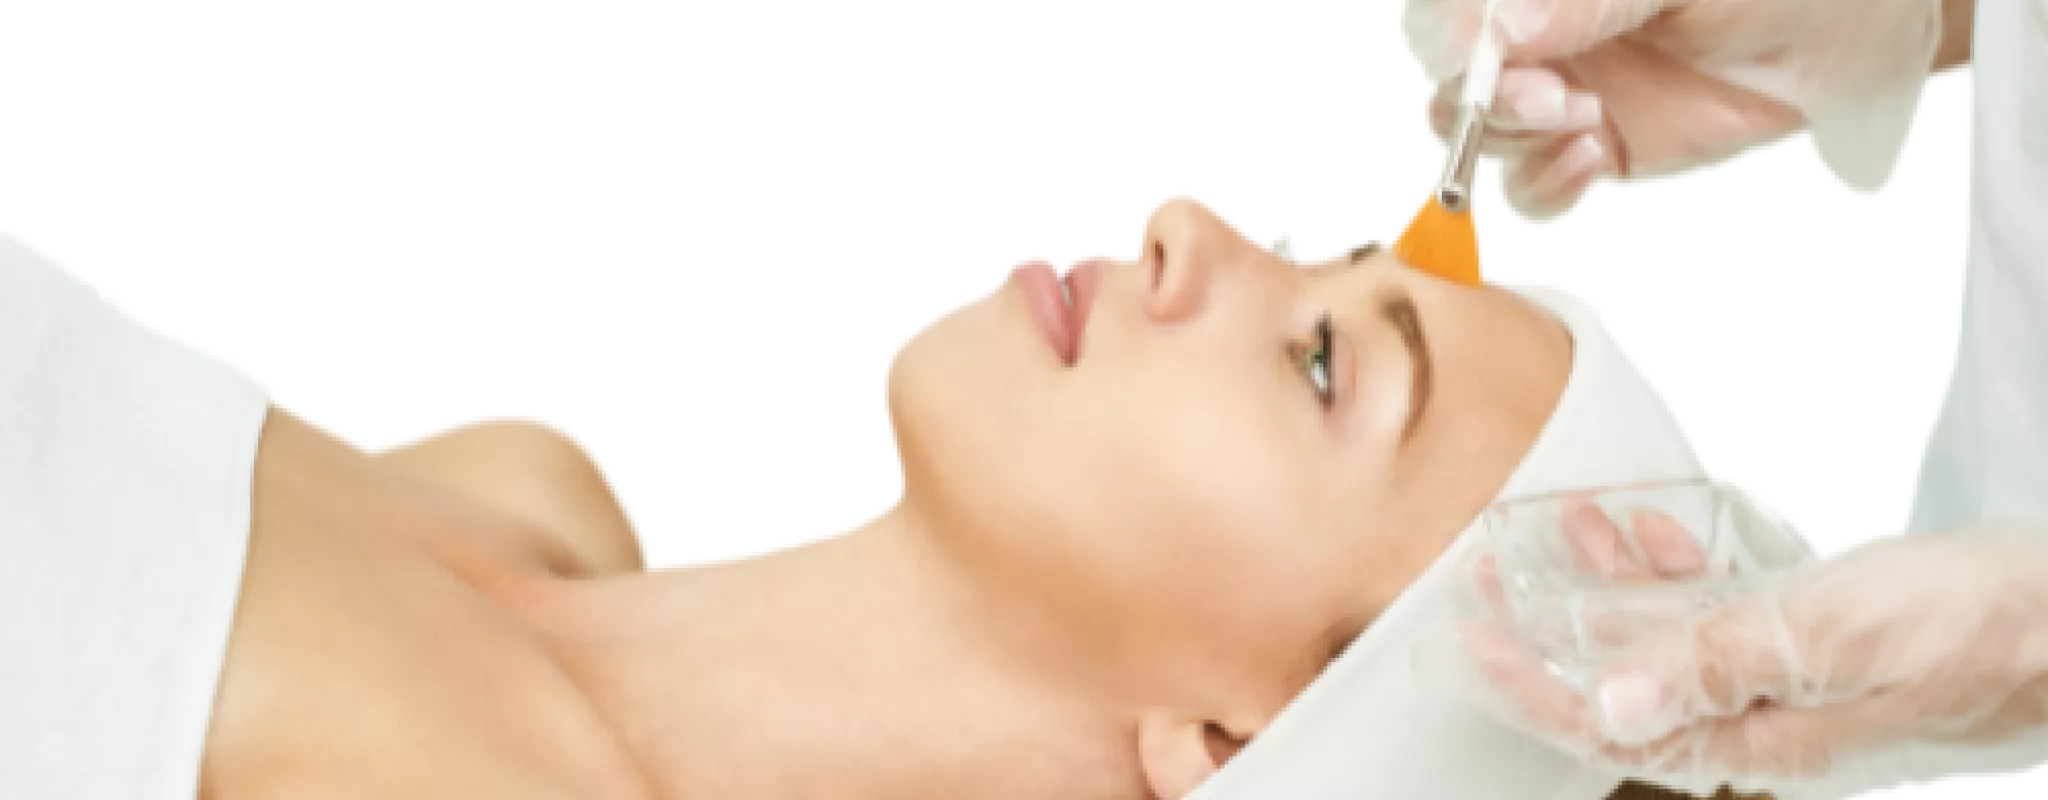 Variety of Chemical Peels offered at Hilltop Electrolysis